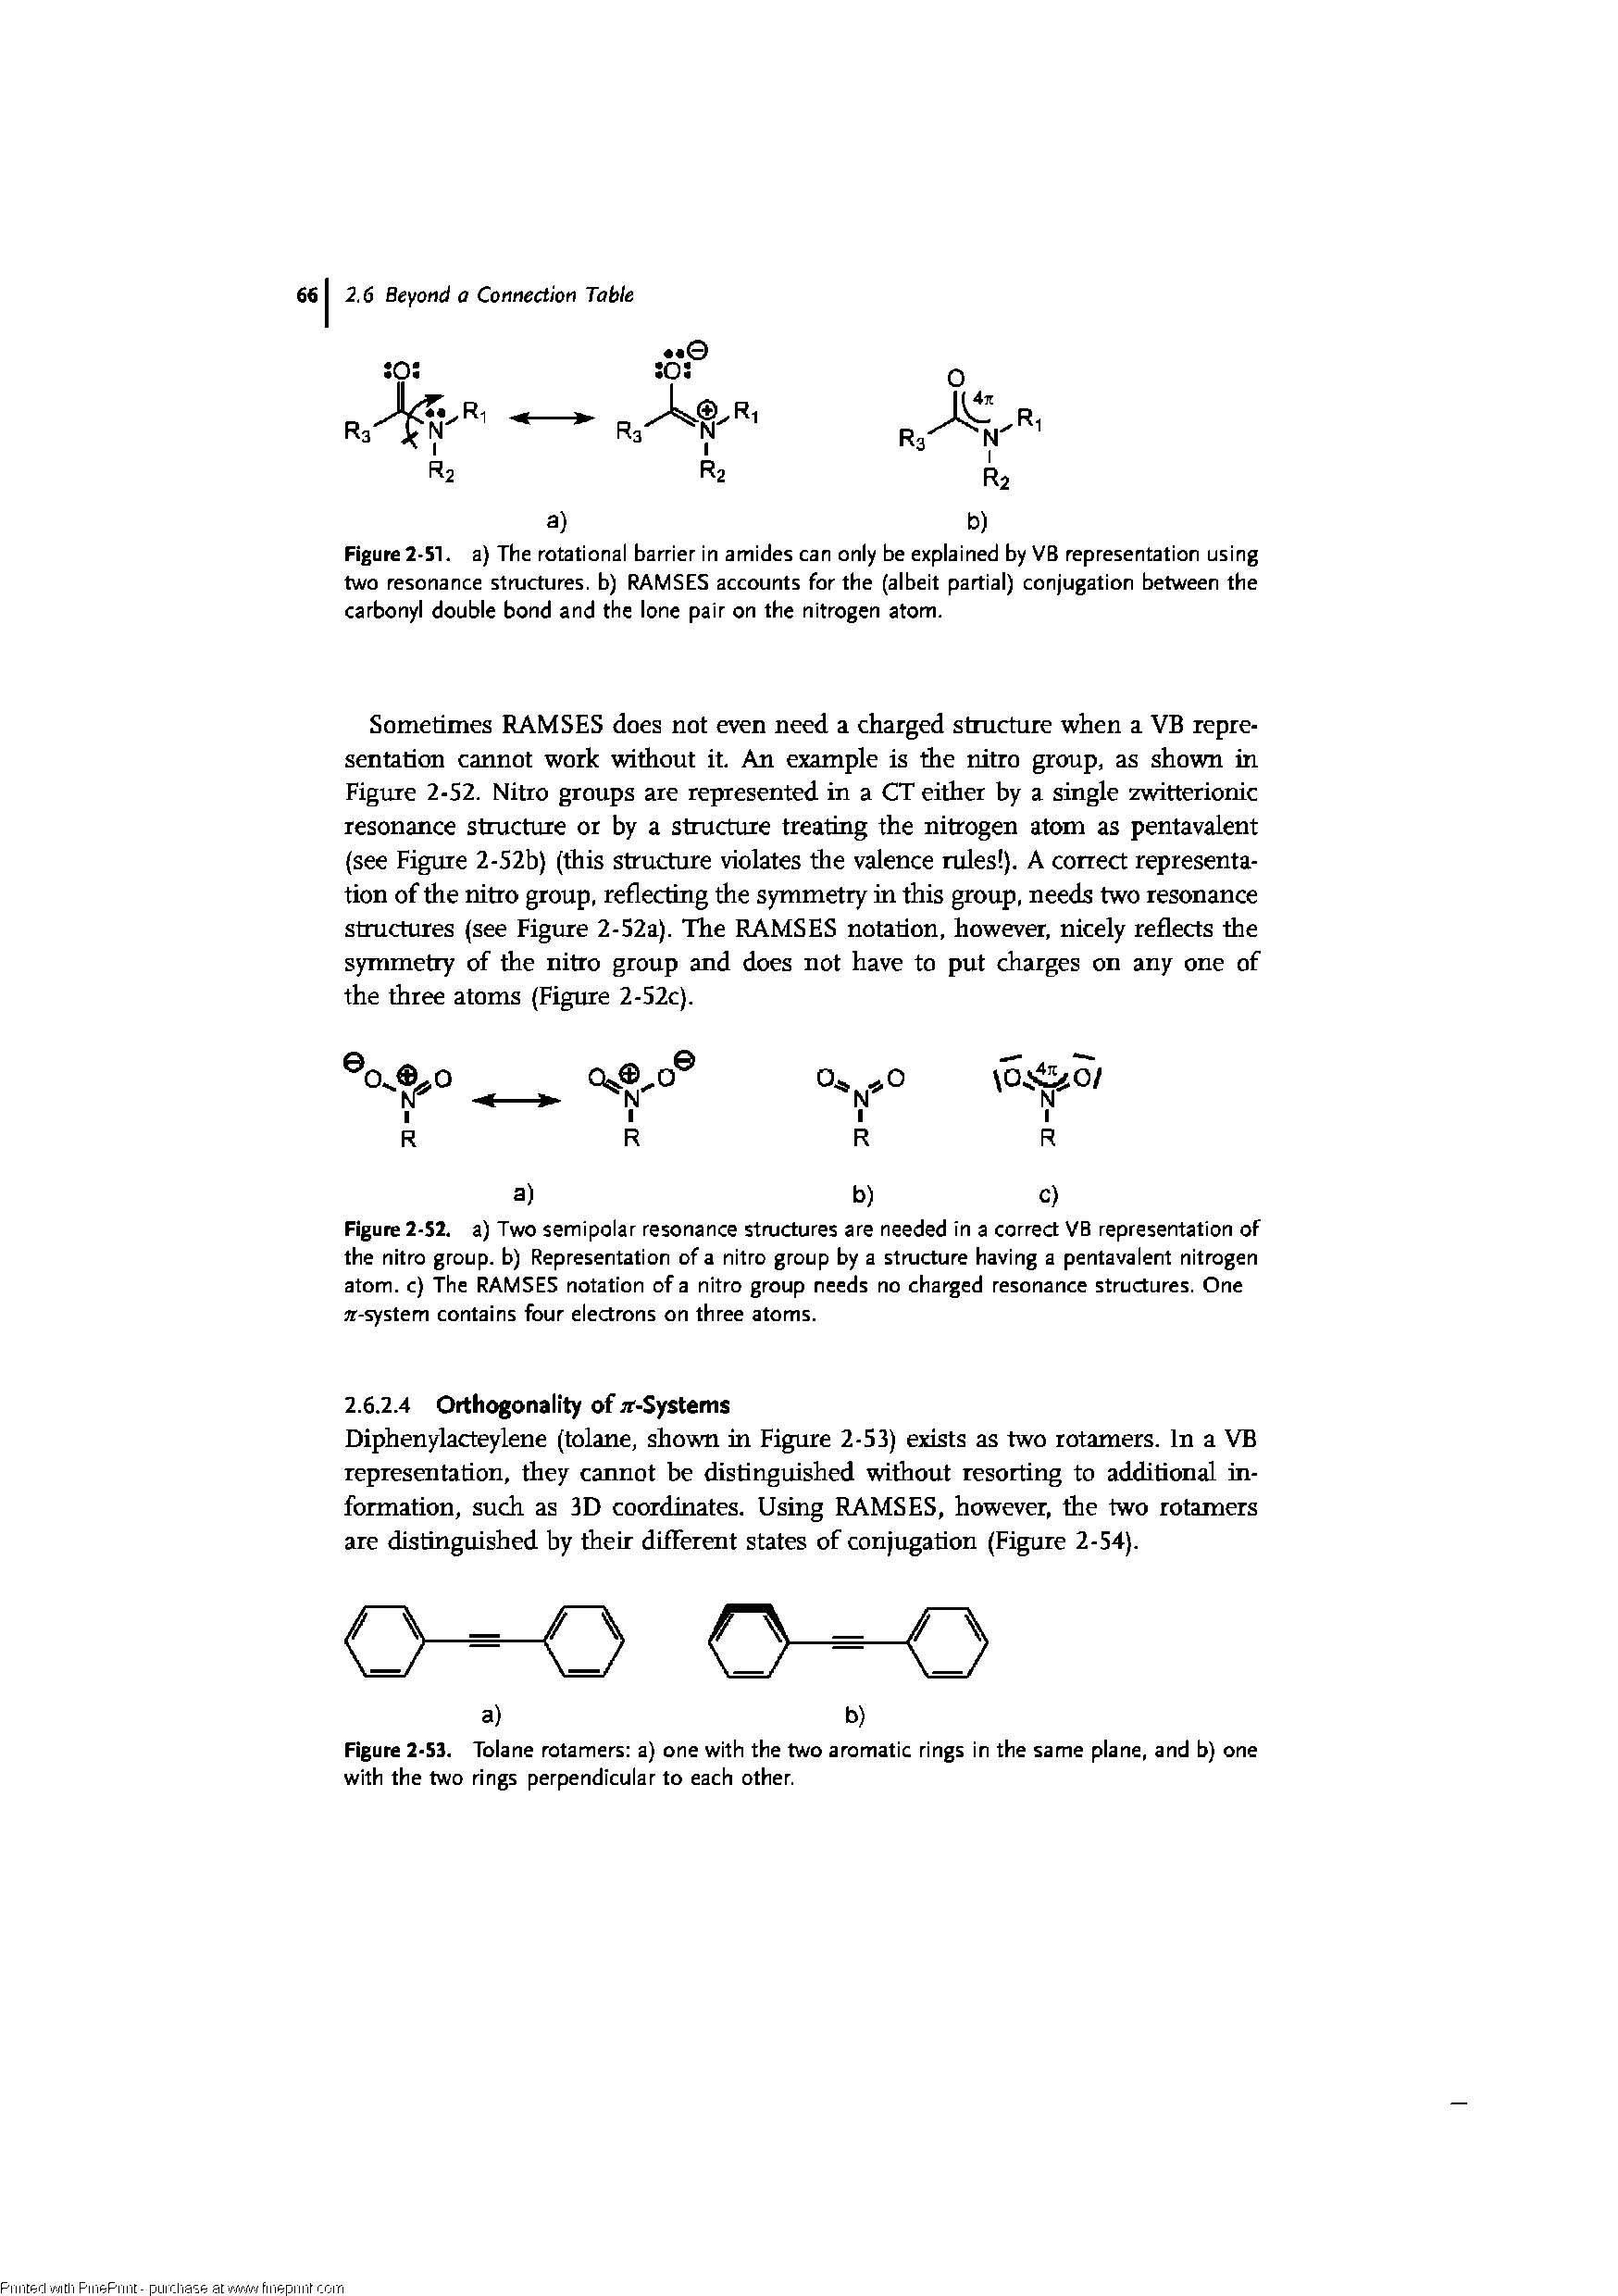 Figure 2-53. Tolane rotamers a) one with the two aromatic rings in the same plane, and b) one with the two rings perpendicular to each other.